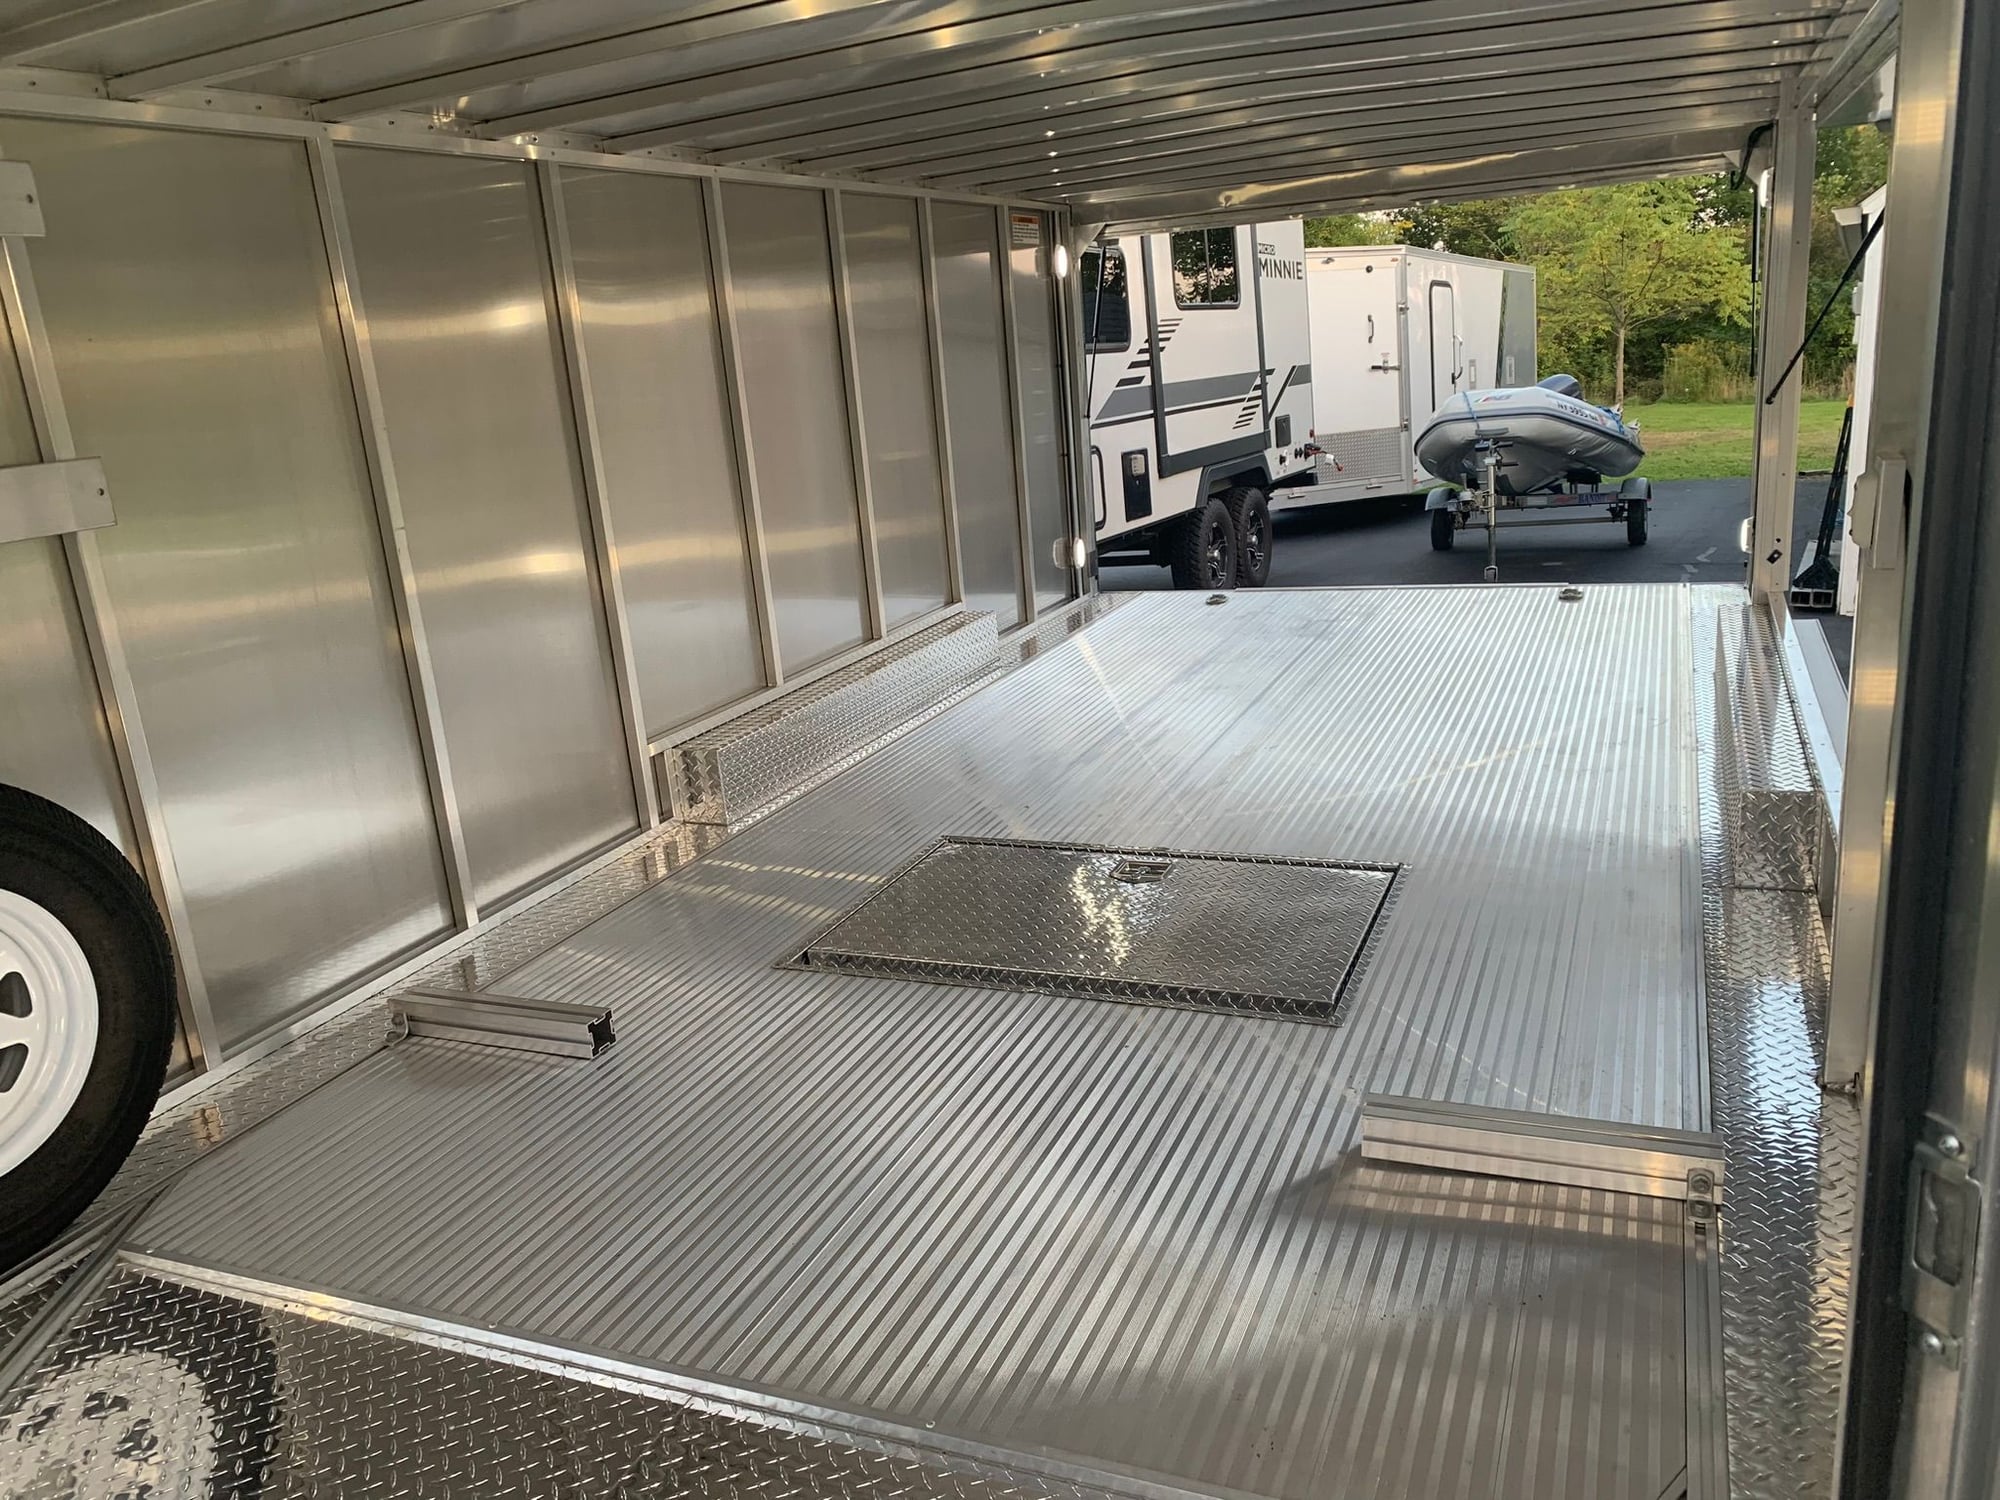 Miscellaneous - Trailex Sports Car Trailer model 84180T 2015 like new condition. - Used - 2015 to 0  All Models - Clayton, NY 13624, United States